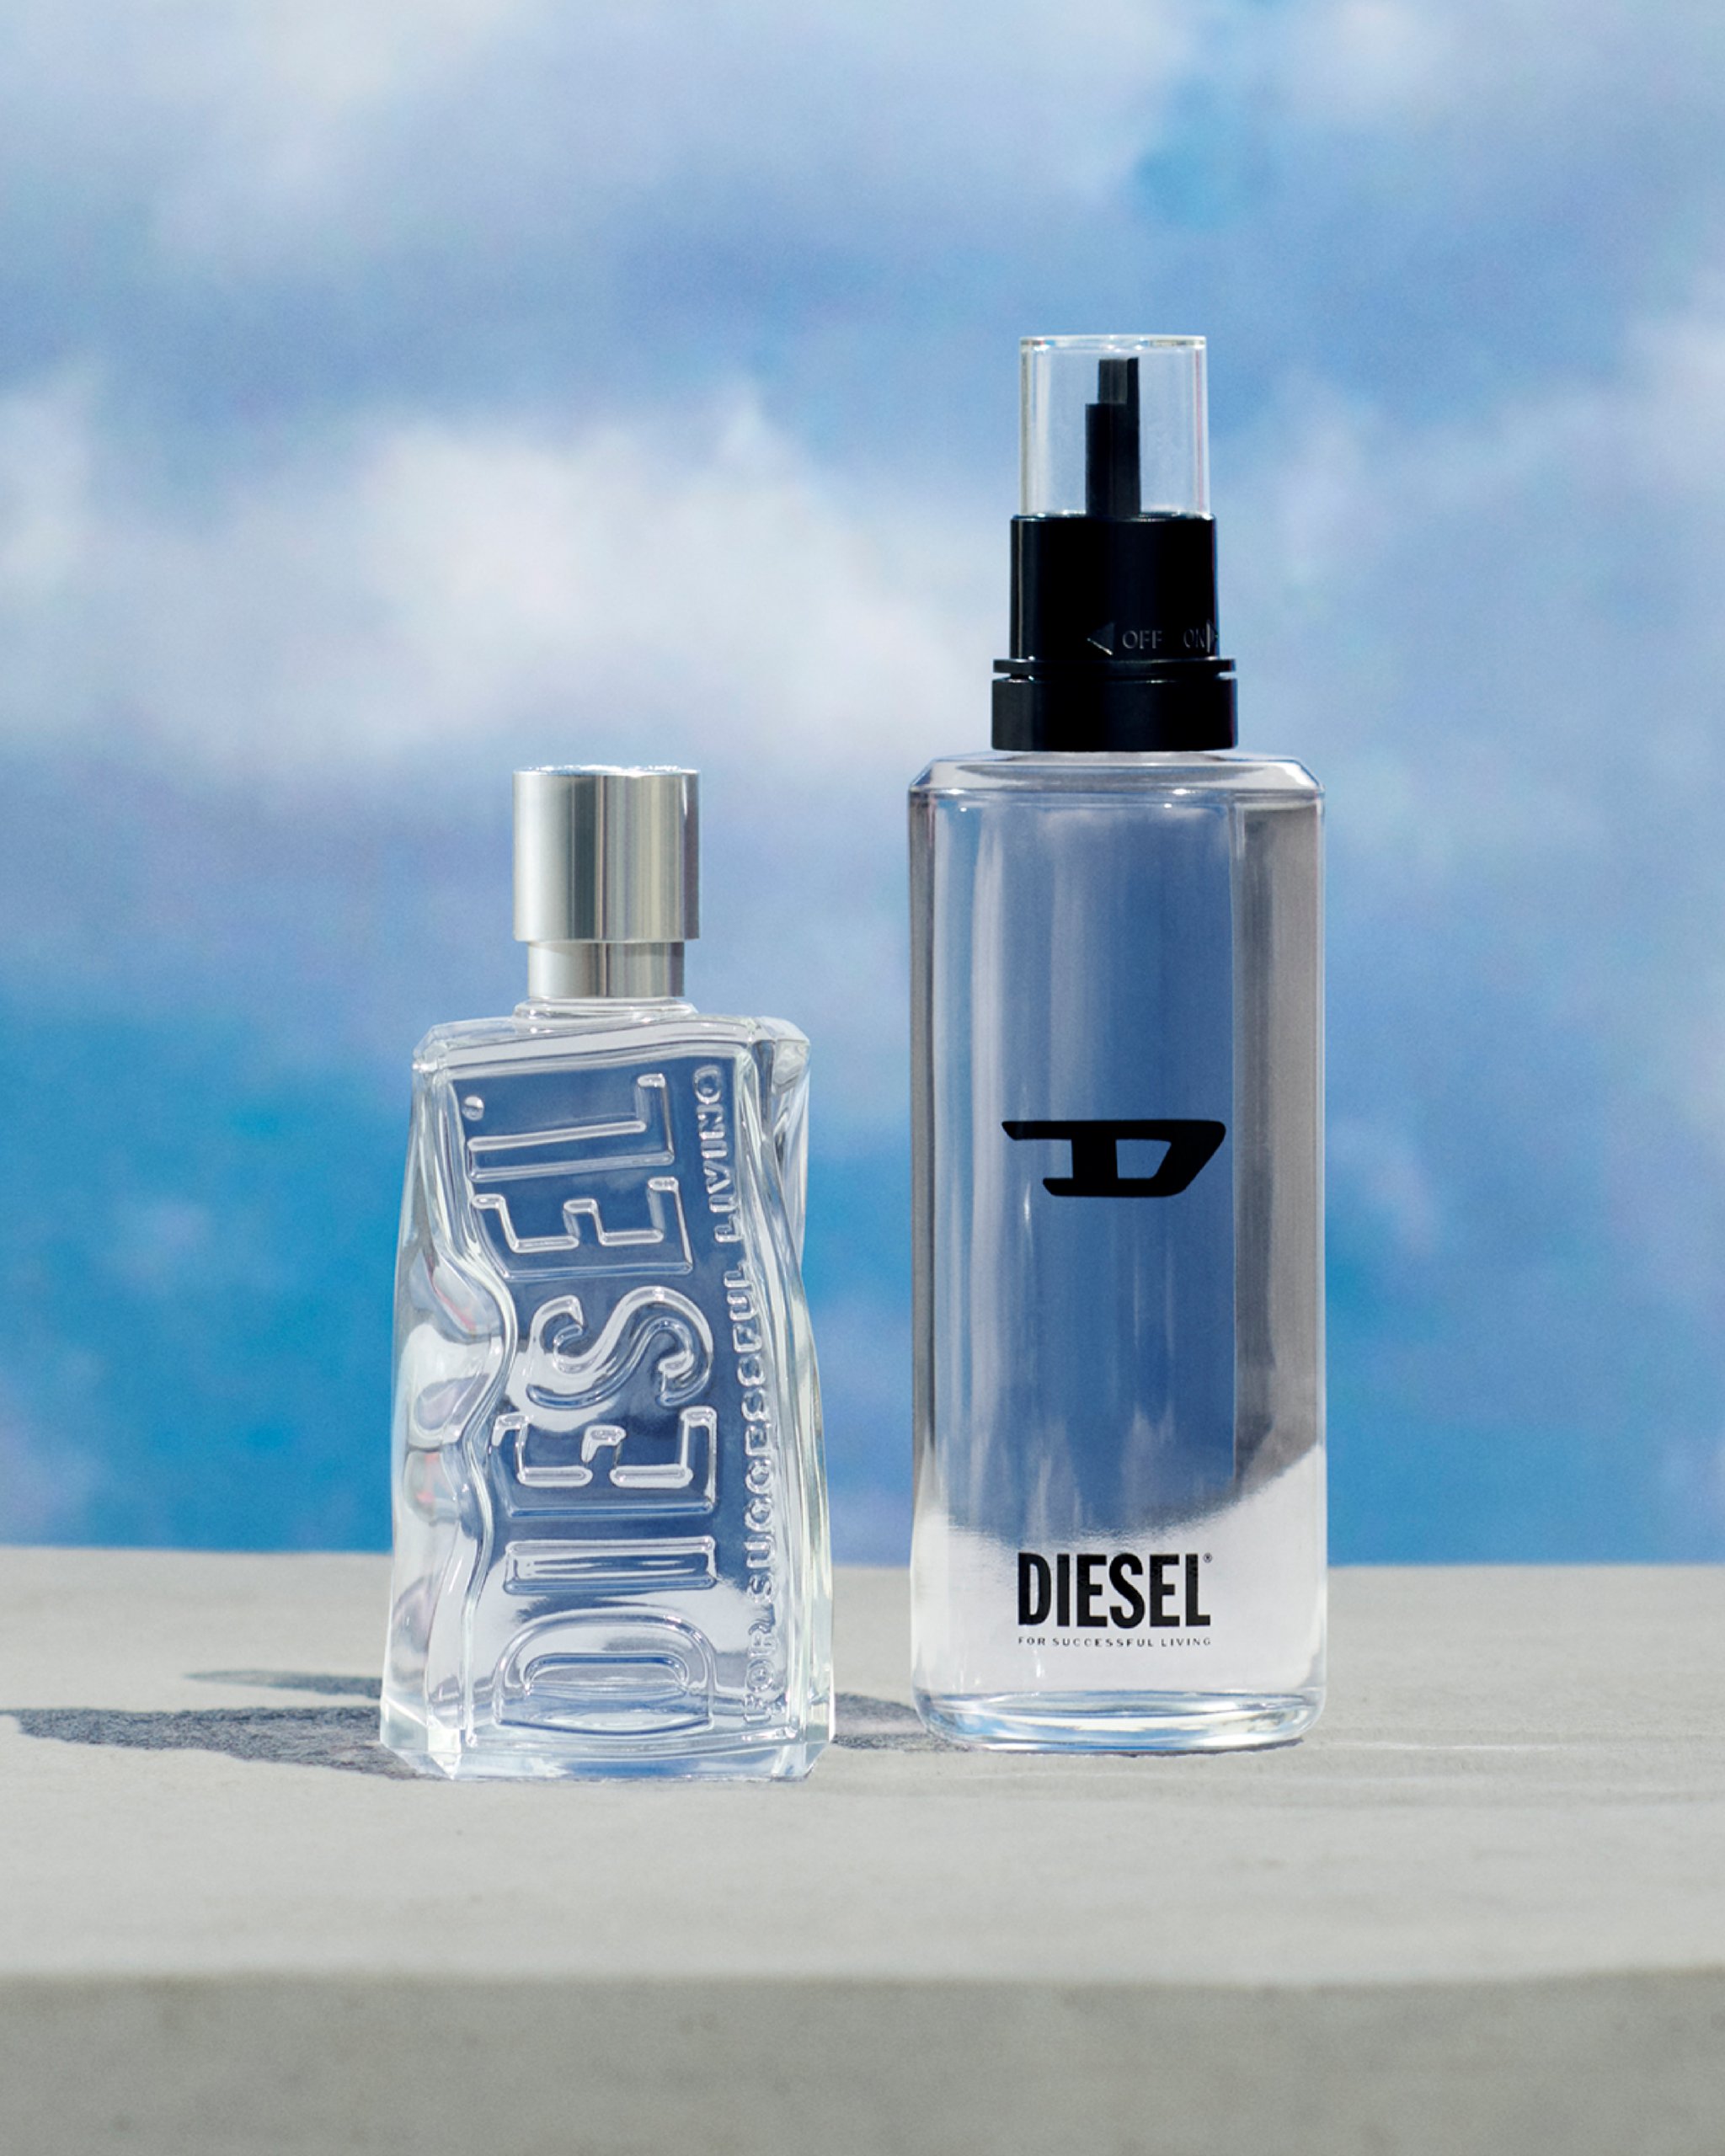 LOW_D-BY-DIESEL---THE-NEW-FRAGRANCE_PRODUCT-GLORIFICATION-STILL-LIFE-_PR-CROPS_DI766_LOREAL-FRAGRANCE-22_DIGITAL-CAMPAIGN_PRODUCT-GLORIFICATION_PR-CROPS_72dpi_07